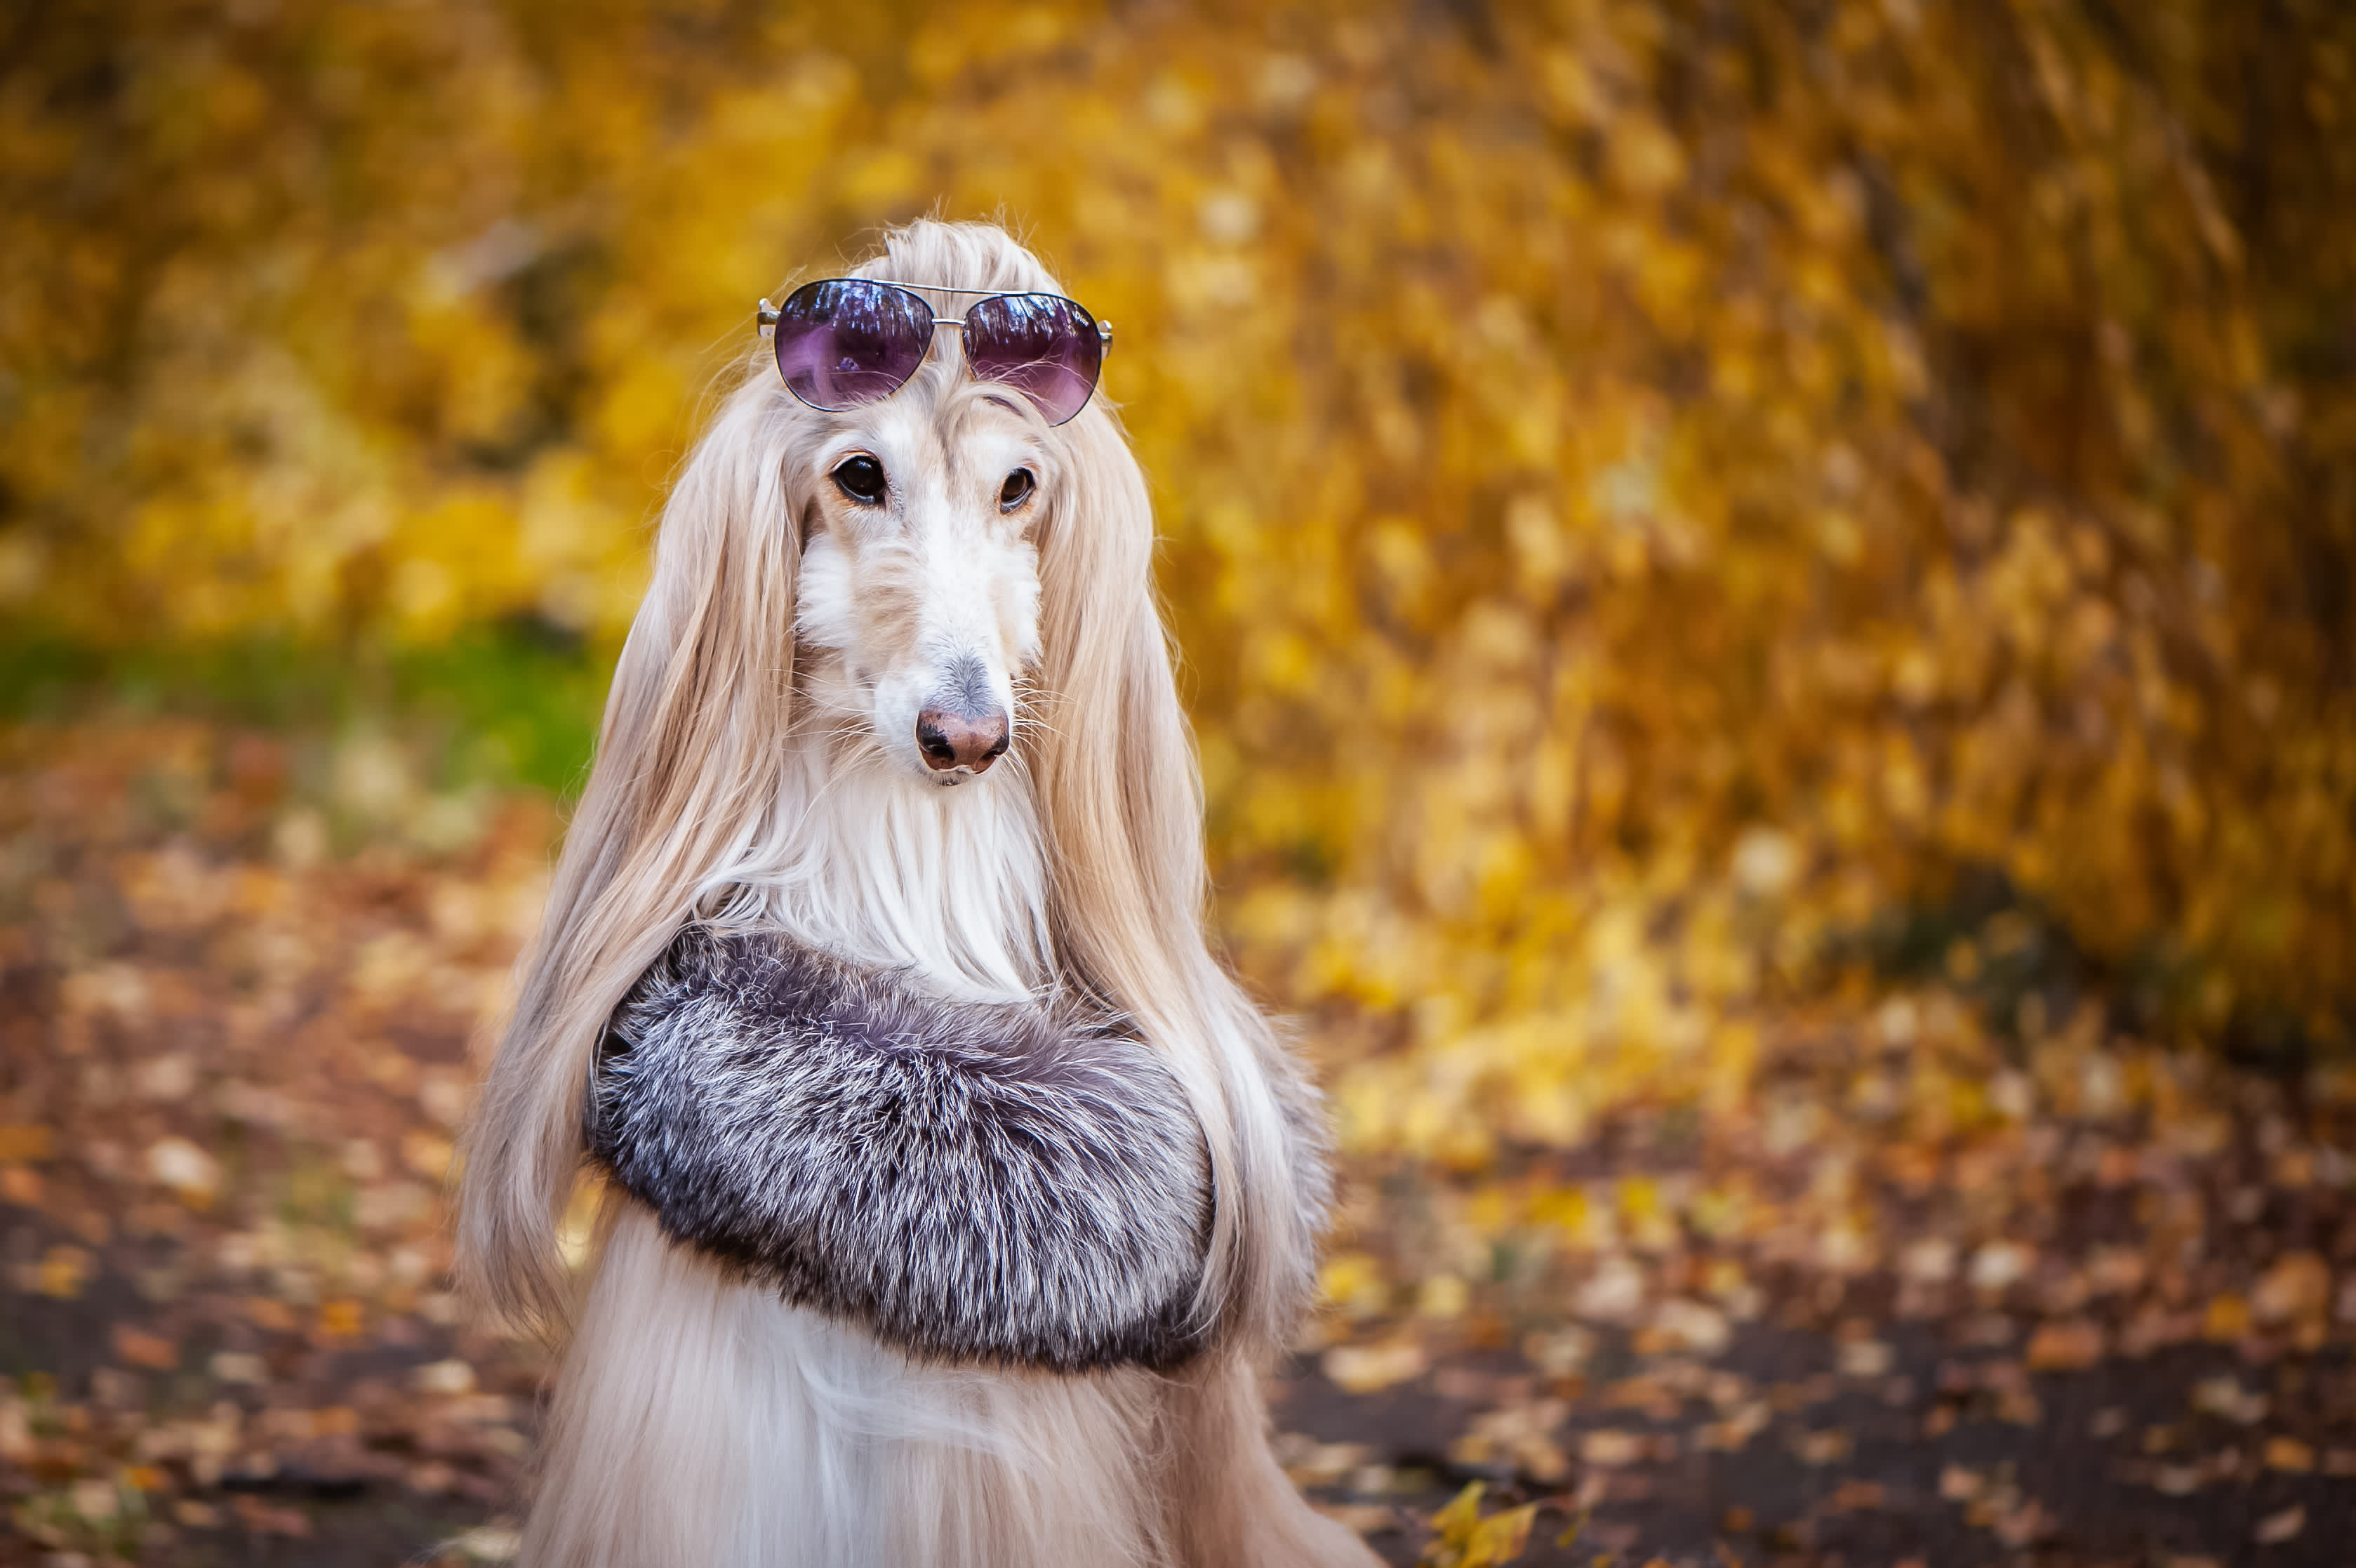 Canva - Stylish, fashionable dog, Afghan hound in a fur Manto and sunglasses against the background of the autumn forest. Pet shopping concept for dogs